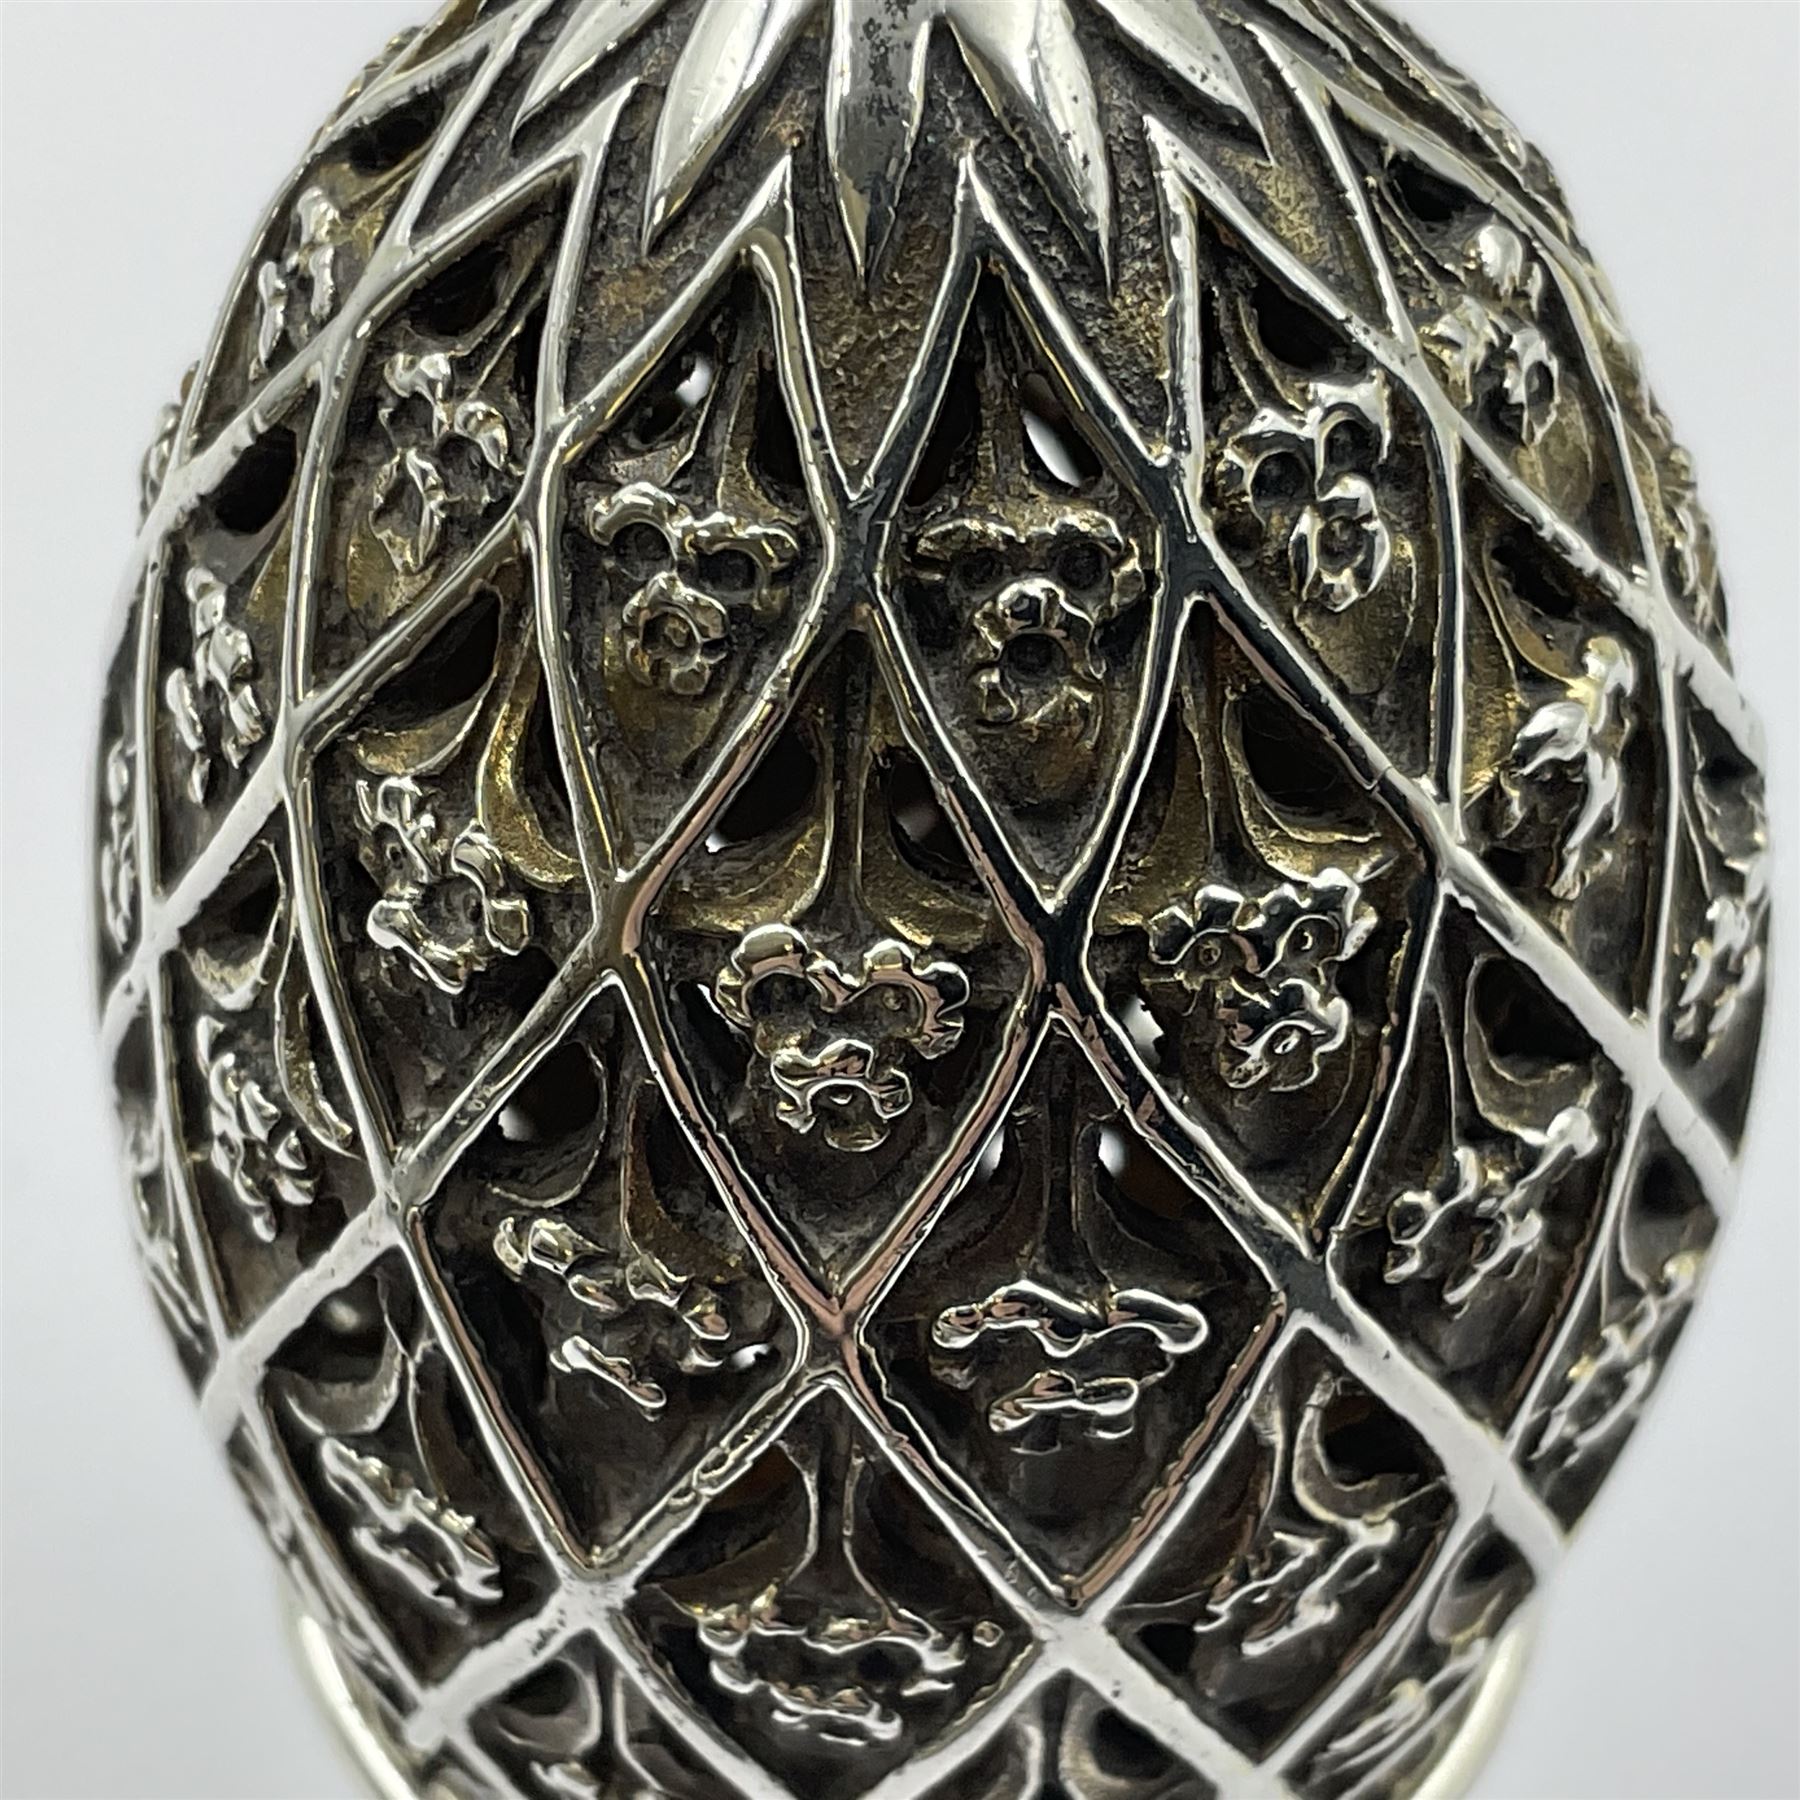 Modern silver limited edition Easter egg - Image 2 of 19